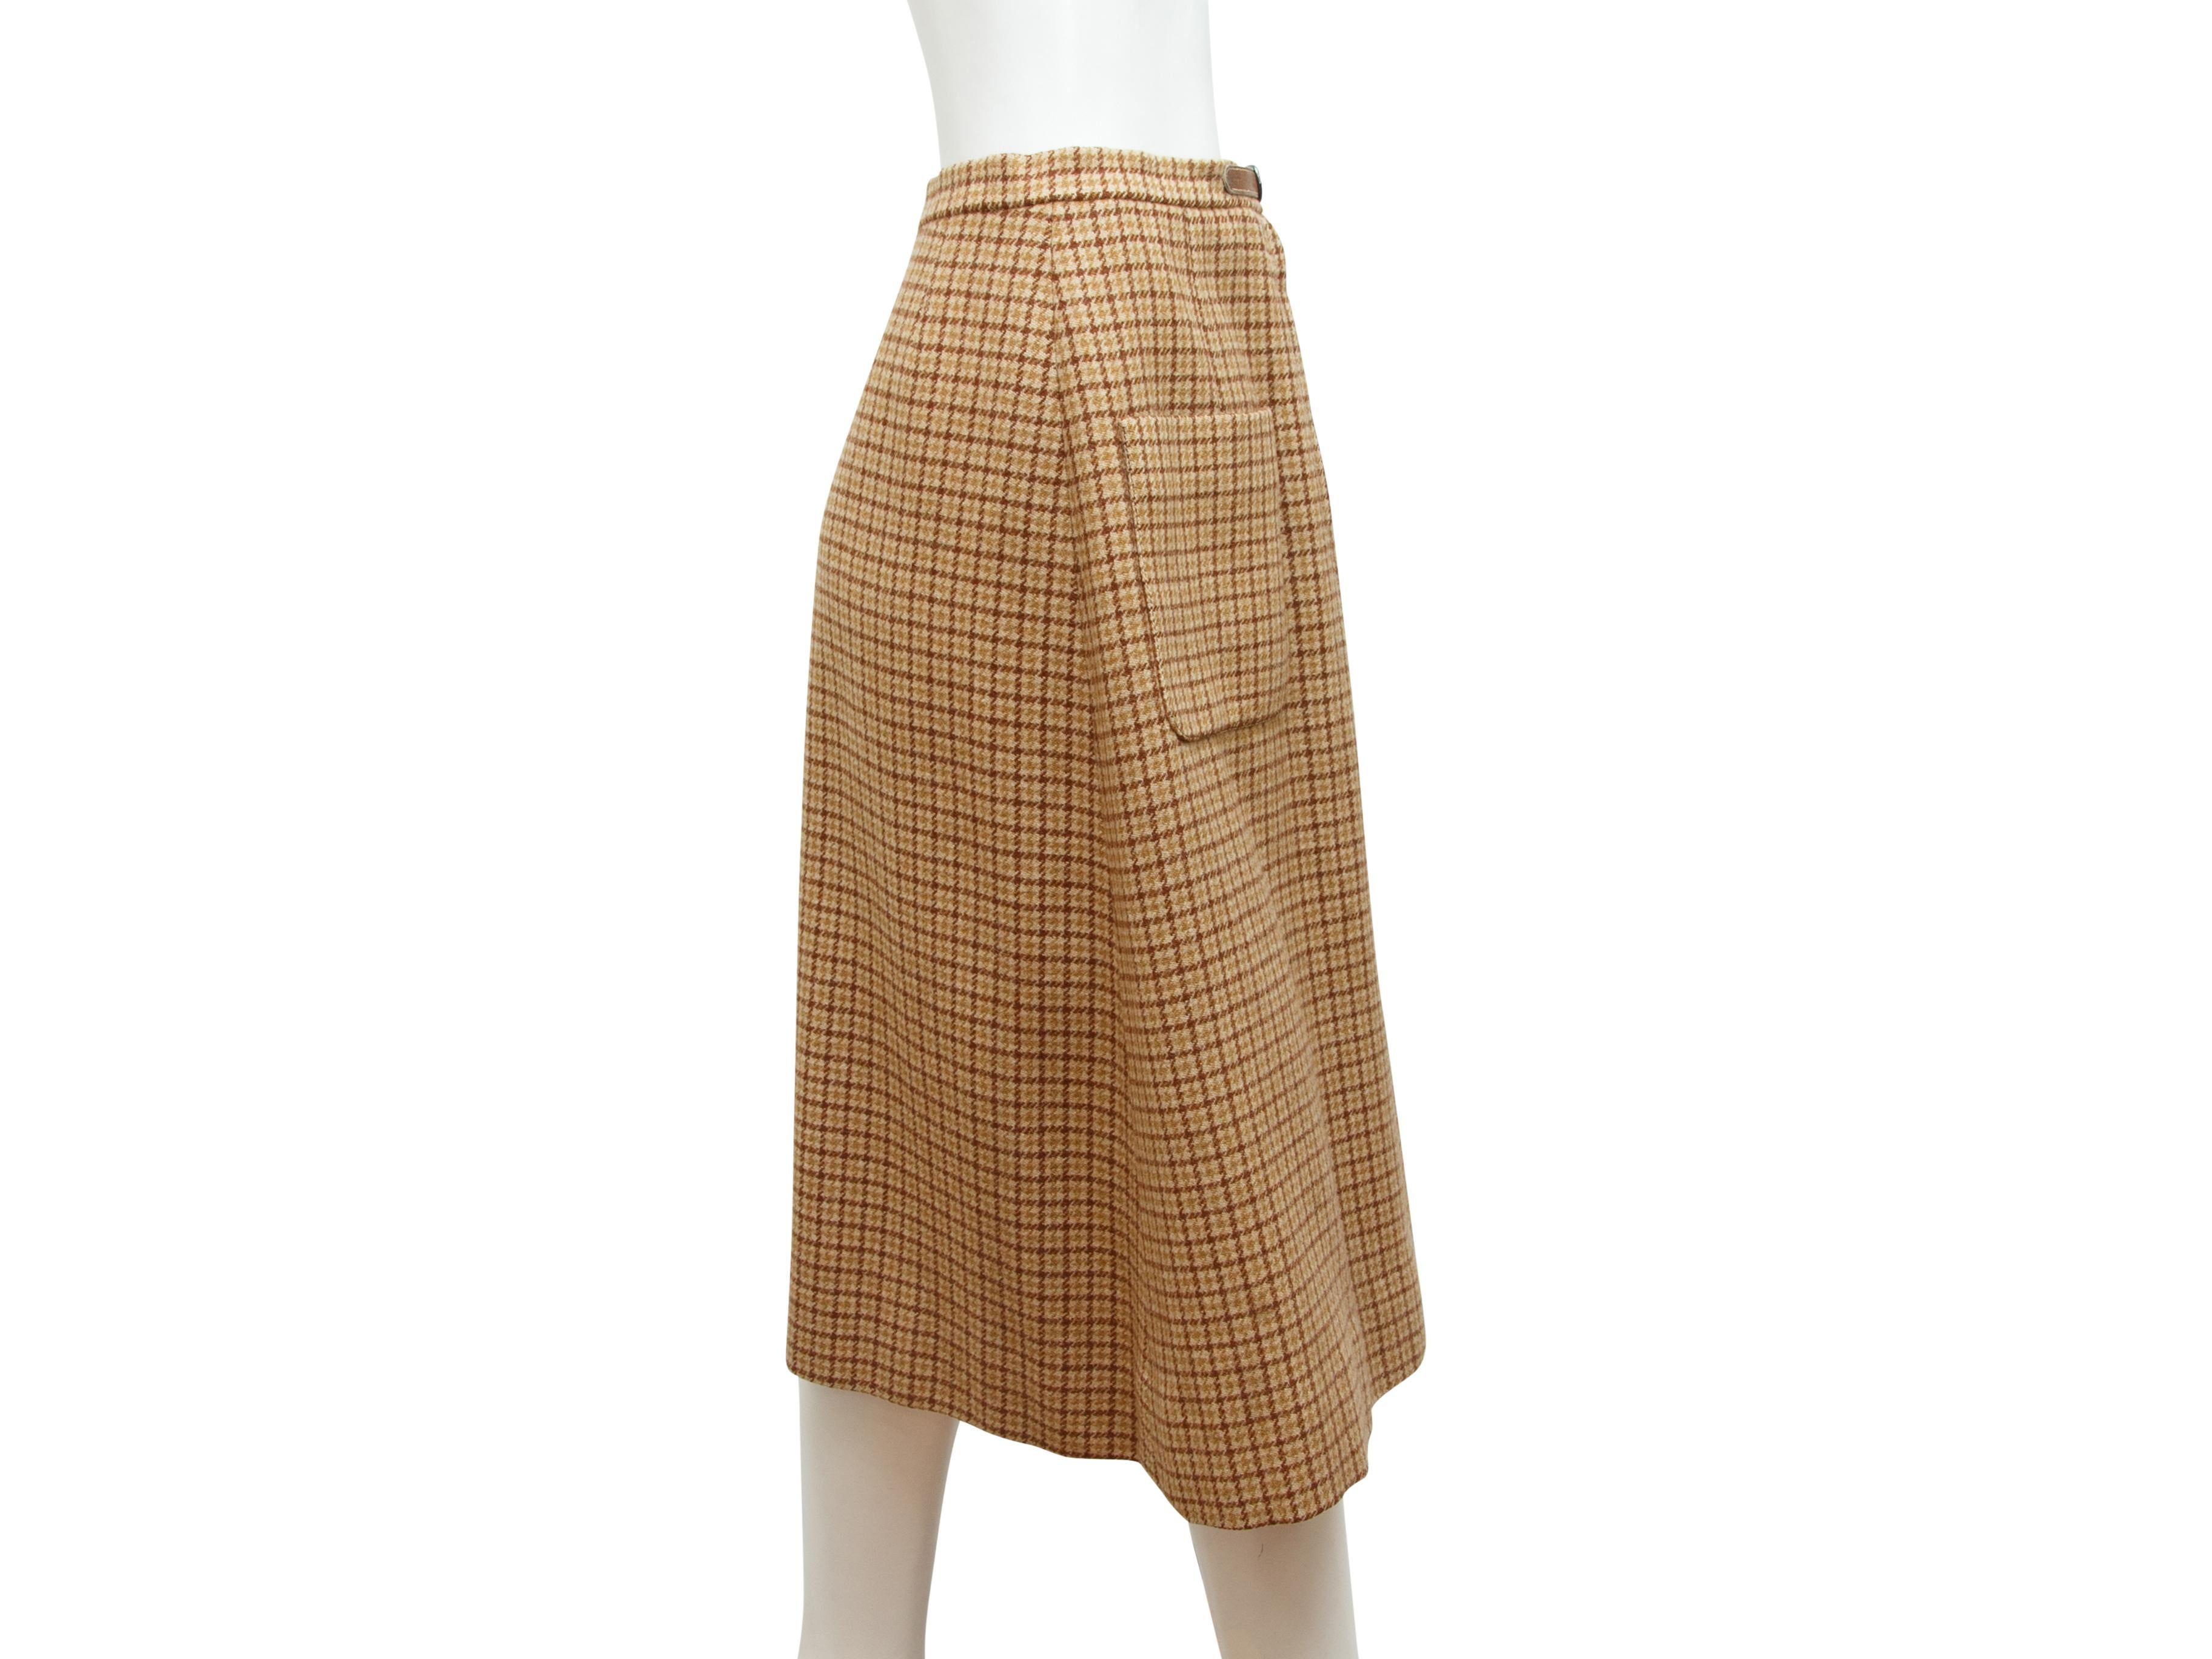 Product details:  Vintage tan wool A-line skirt by Hermes.  Leather belted accent.  Zip-front closure.  Front patch pockets.  Label size FR 42.  30